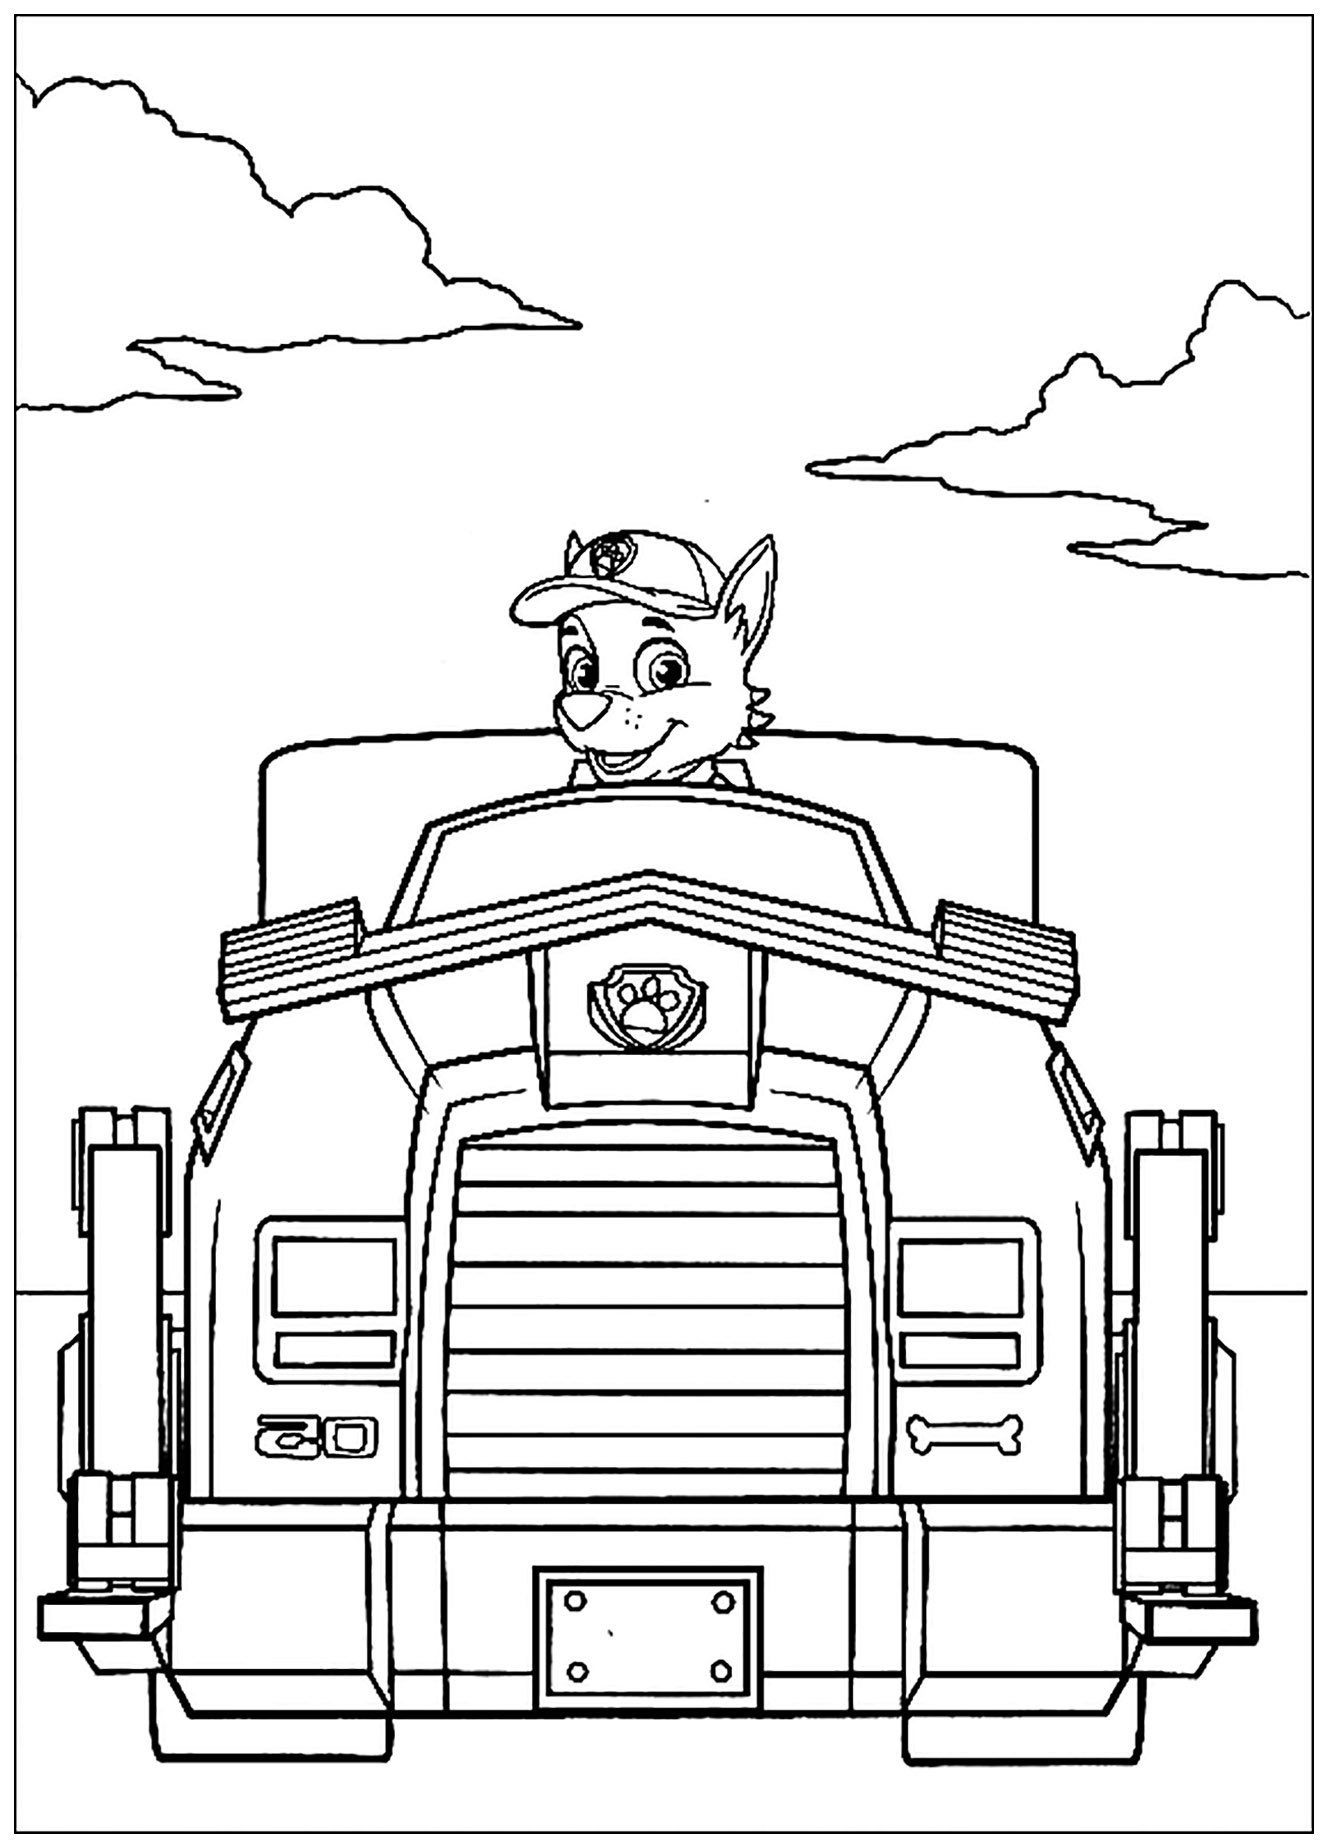 Get your pencils and markers ready to color this Pat Patrol: Harvest Vehicle 2 coloring page